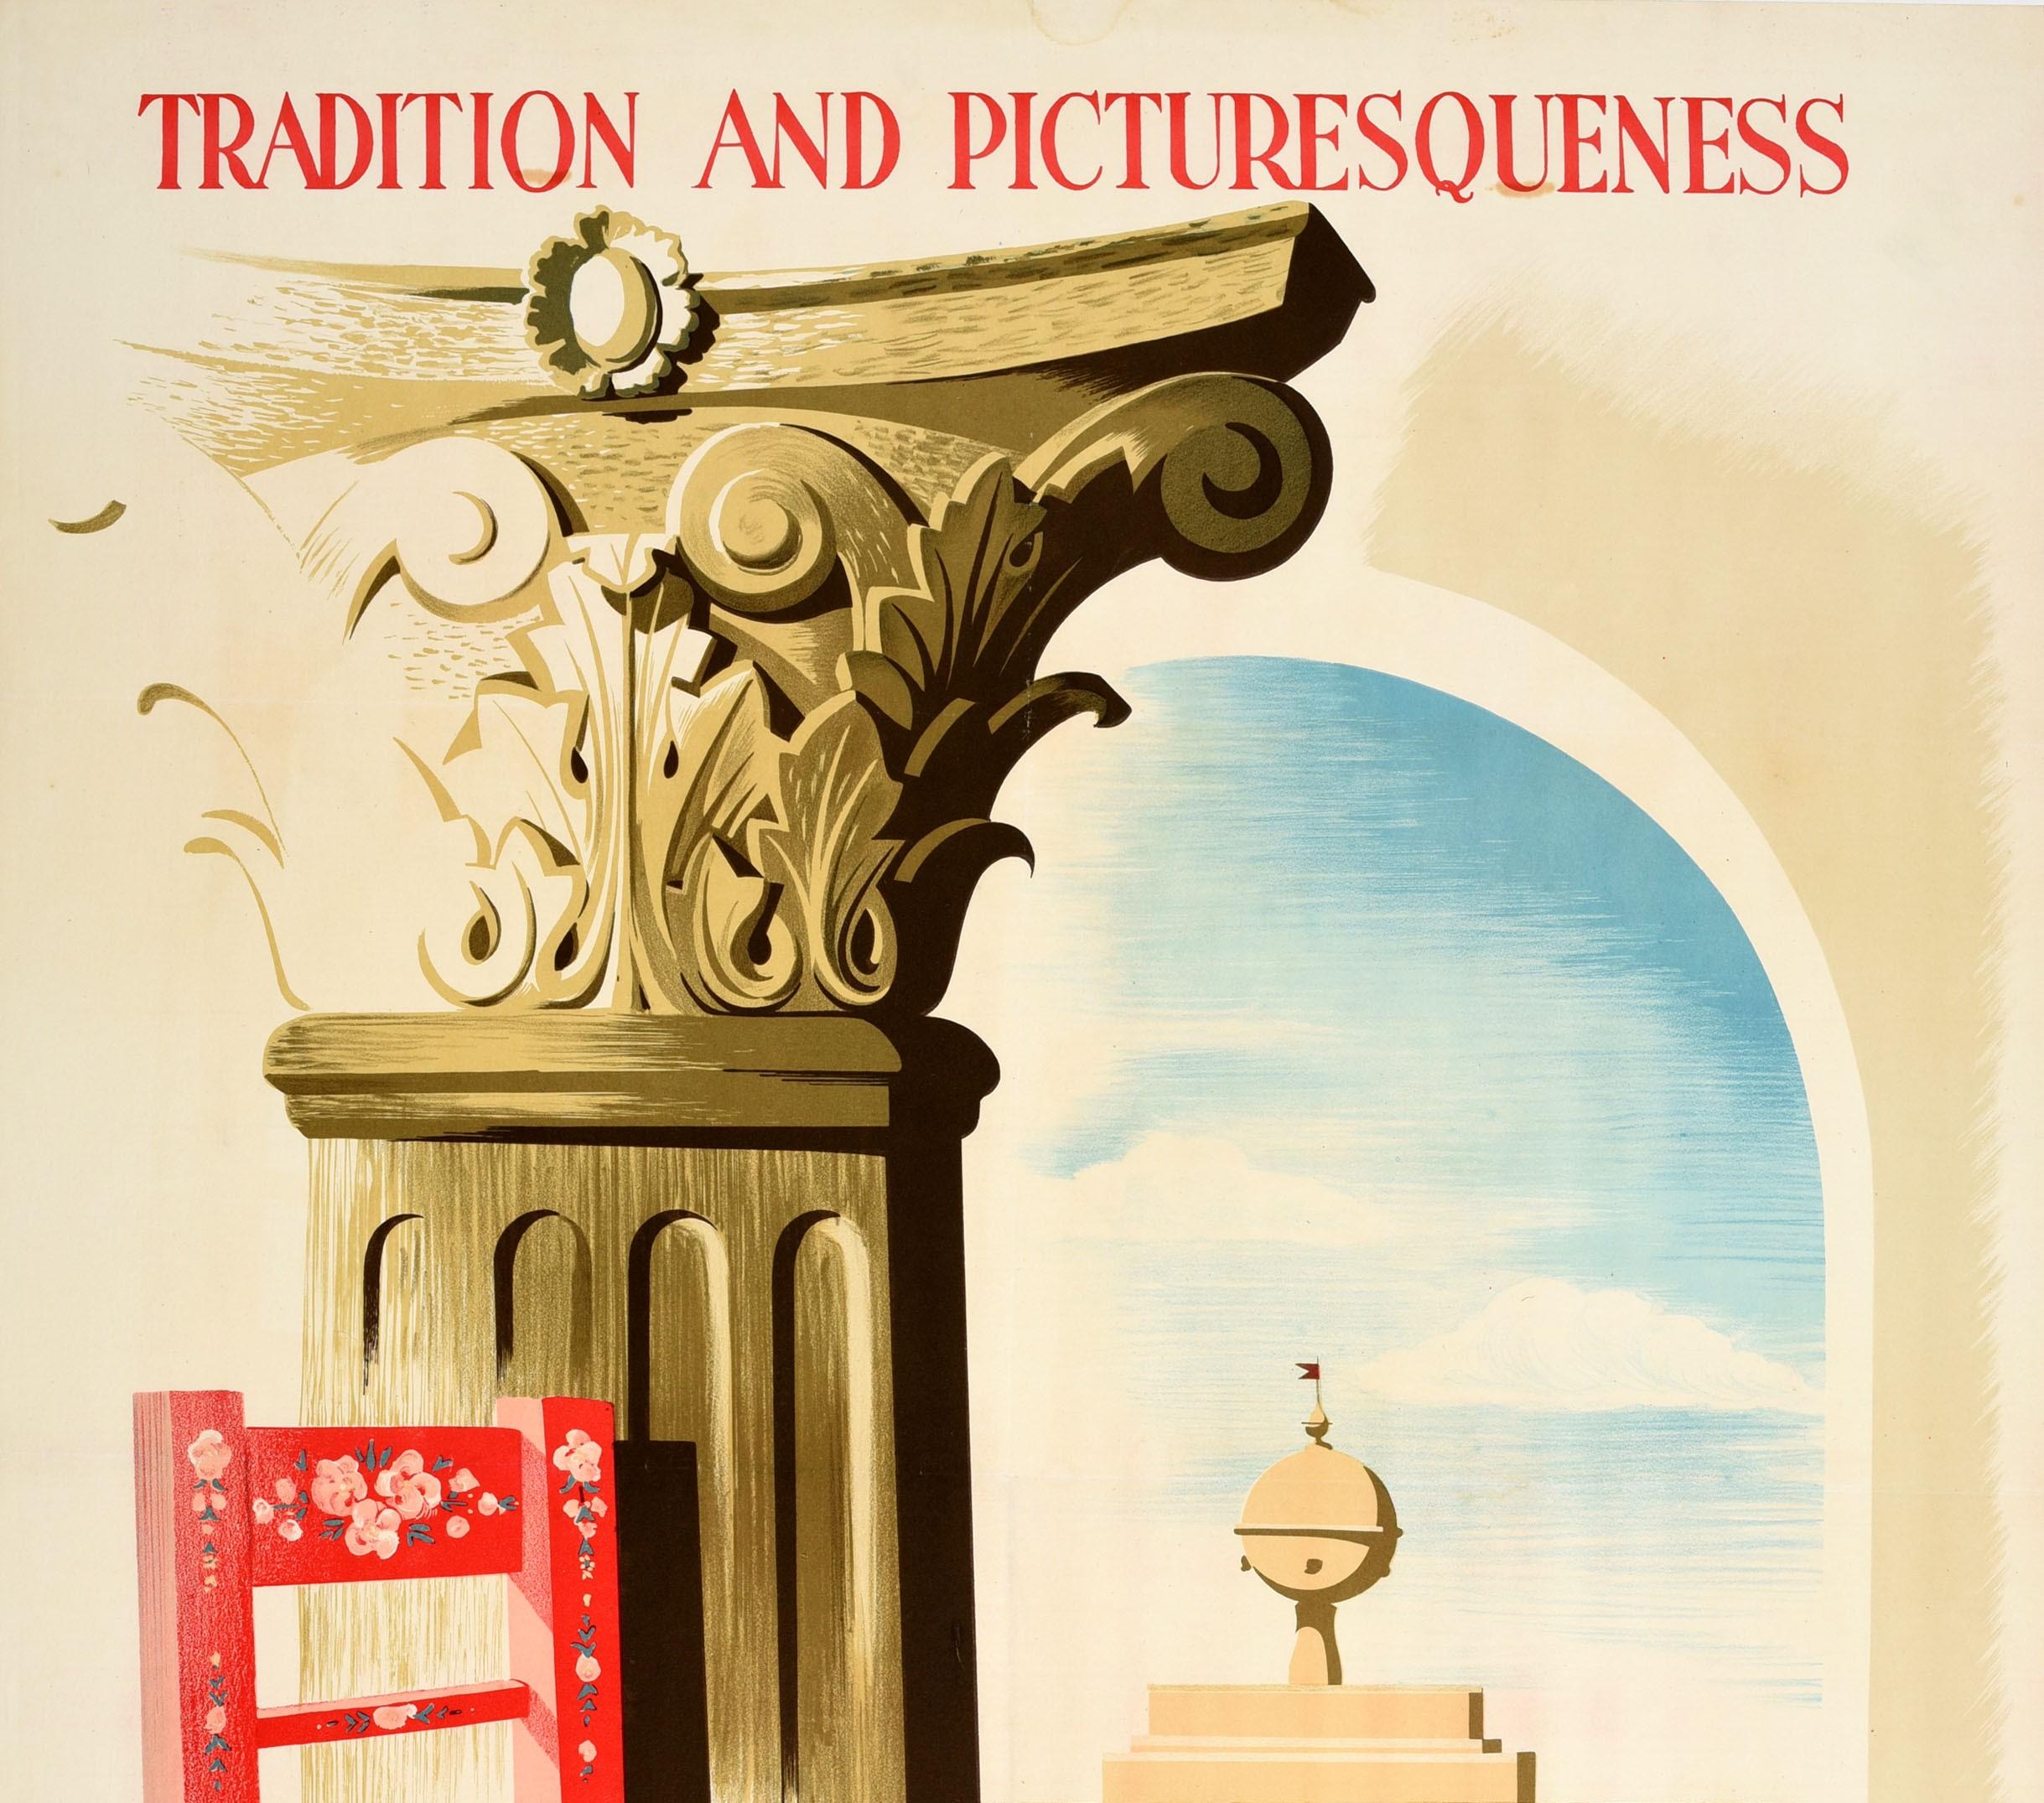 Original vintage travel poster for Ancient Evora Portugal Tradition and Picturesqueness showing the decoration at the top of an ancient pillar with a red floral chair in the foreground and a view through an arch to the historic 1556 spherical